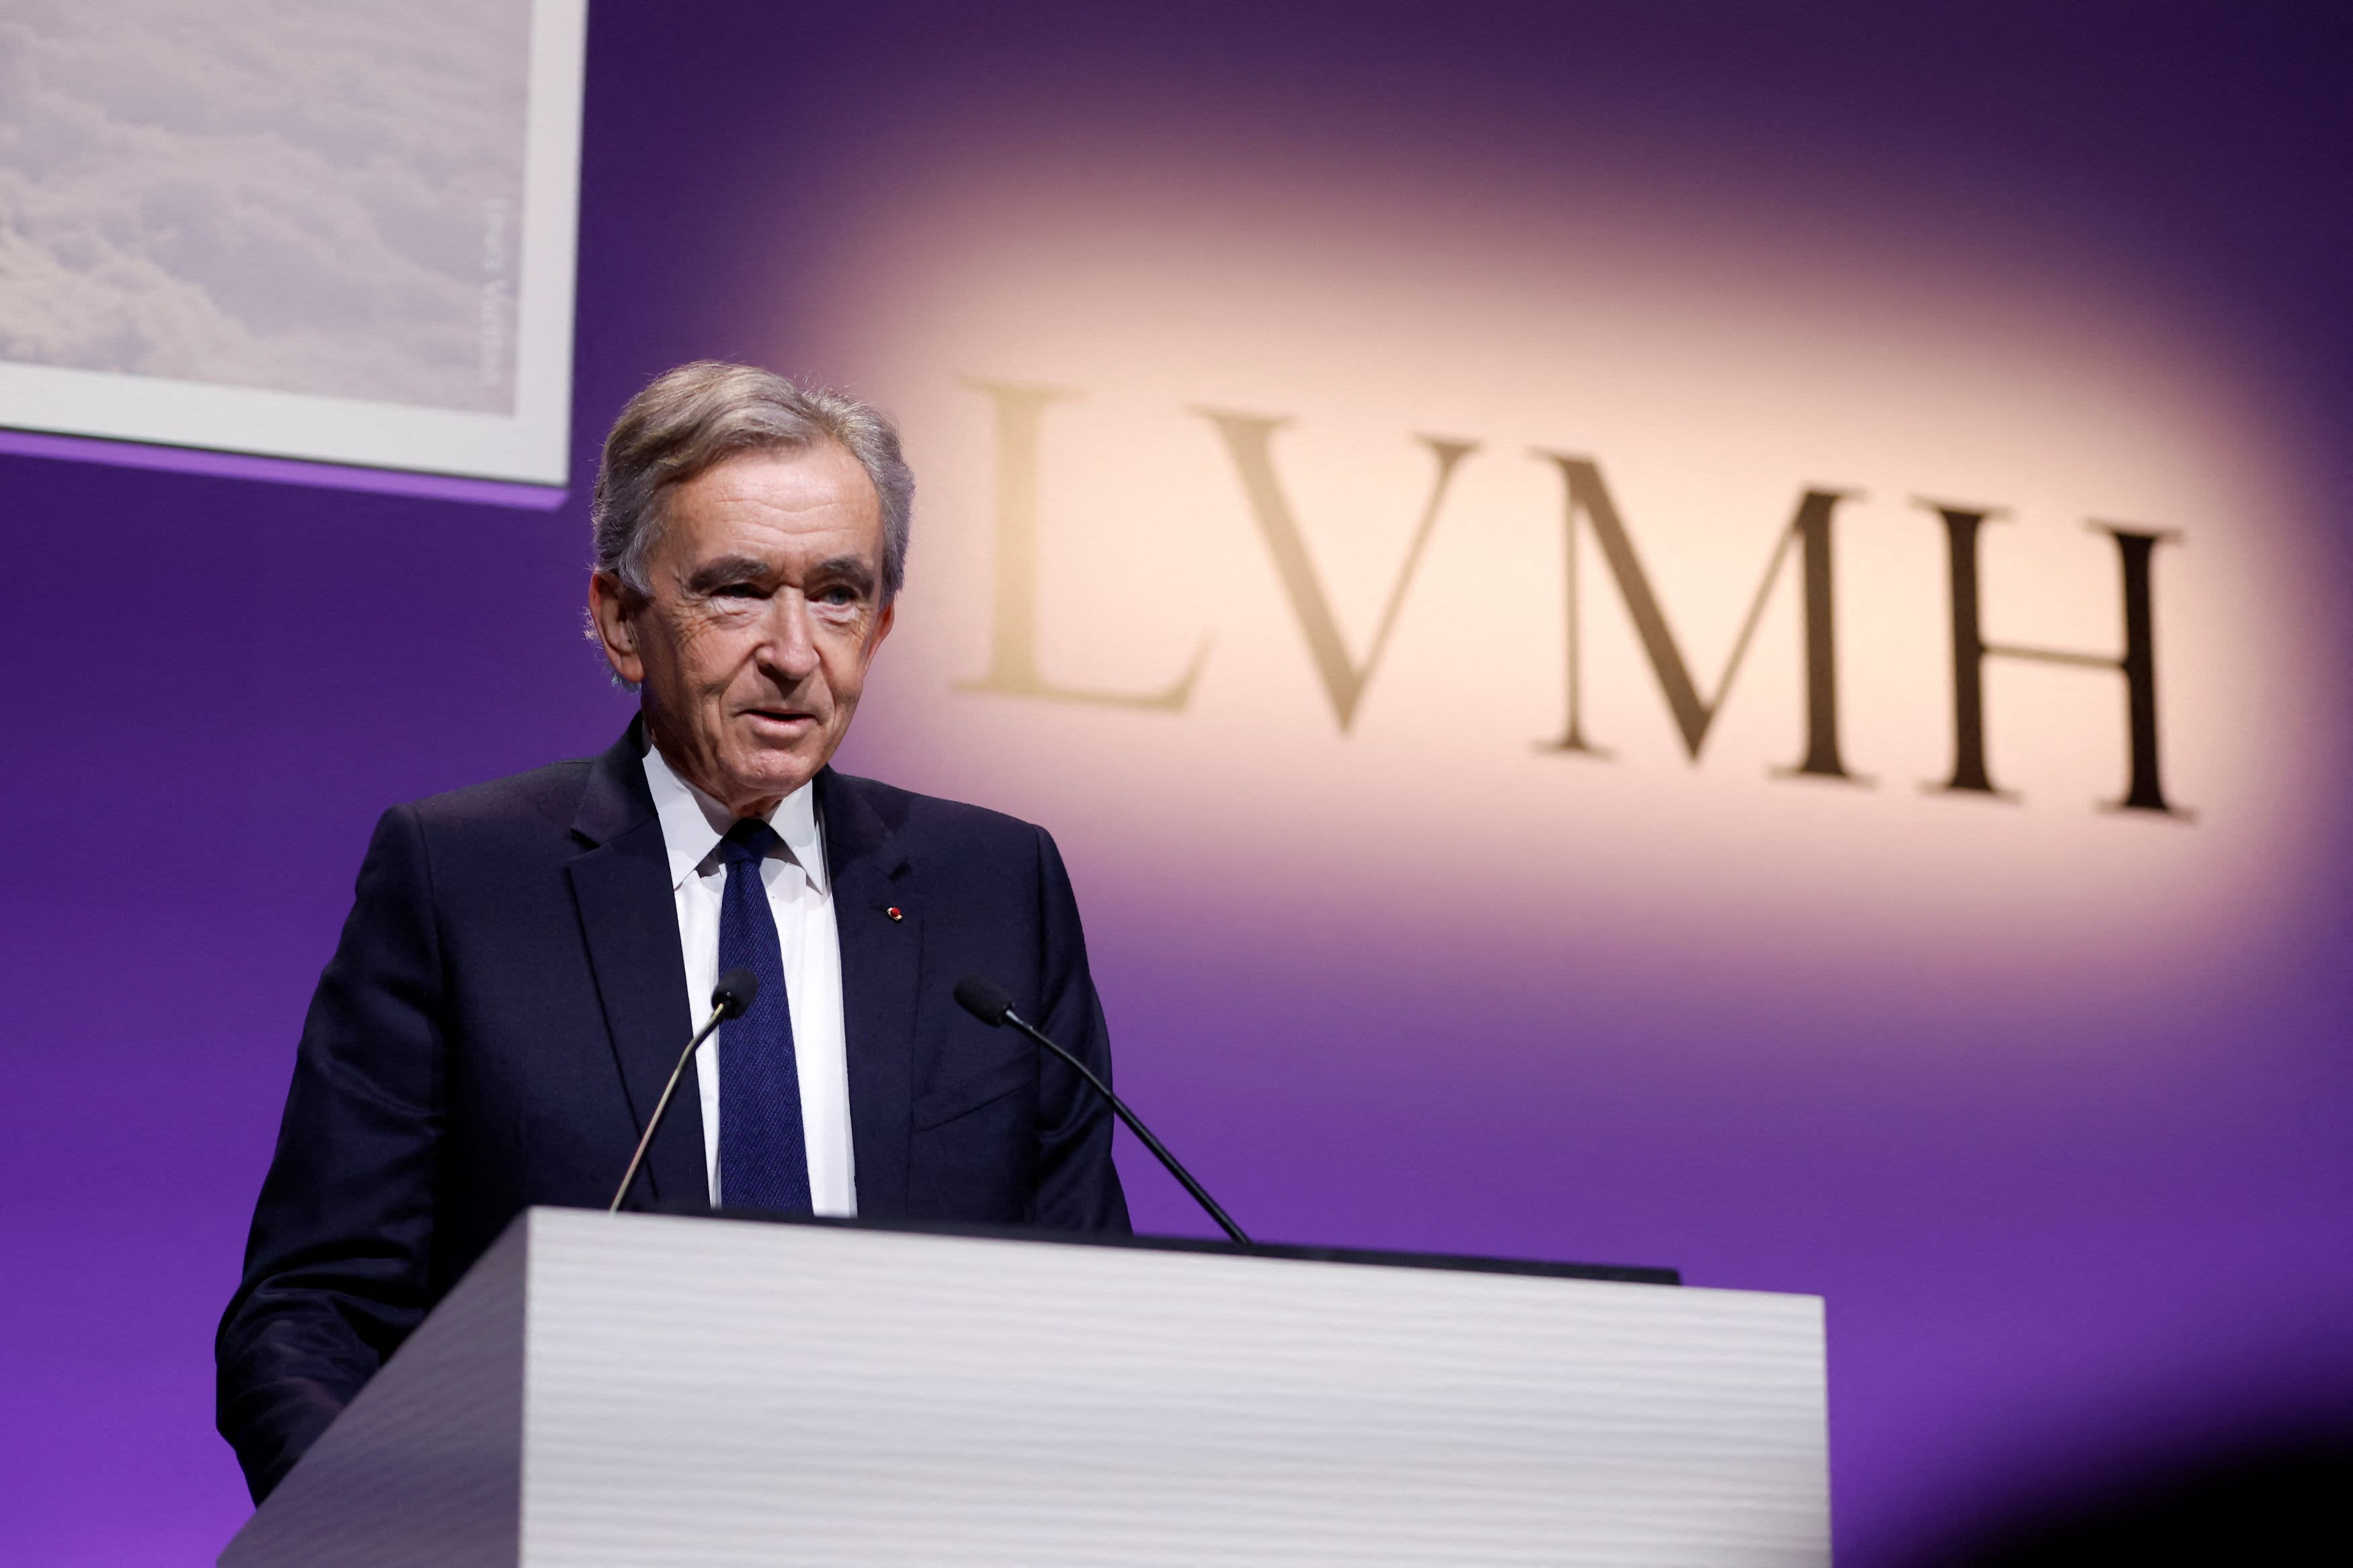 LVMH Sold $50.9 Billion Worth of Luxury Goods in the First Nine